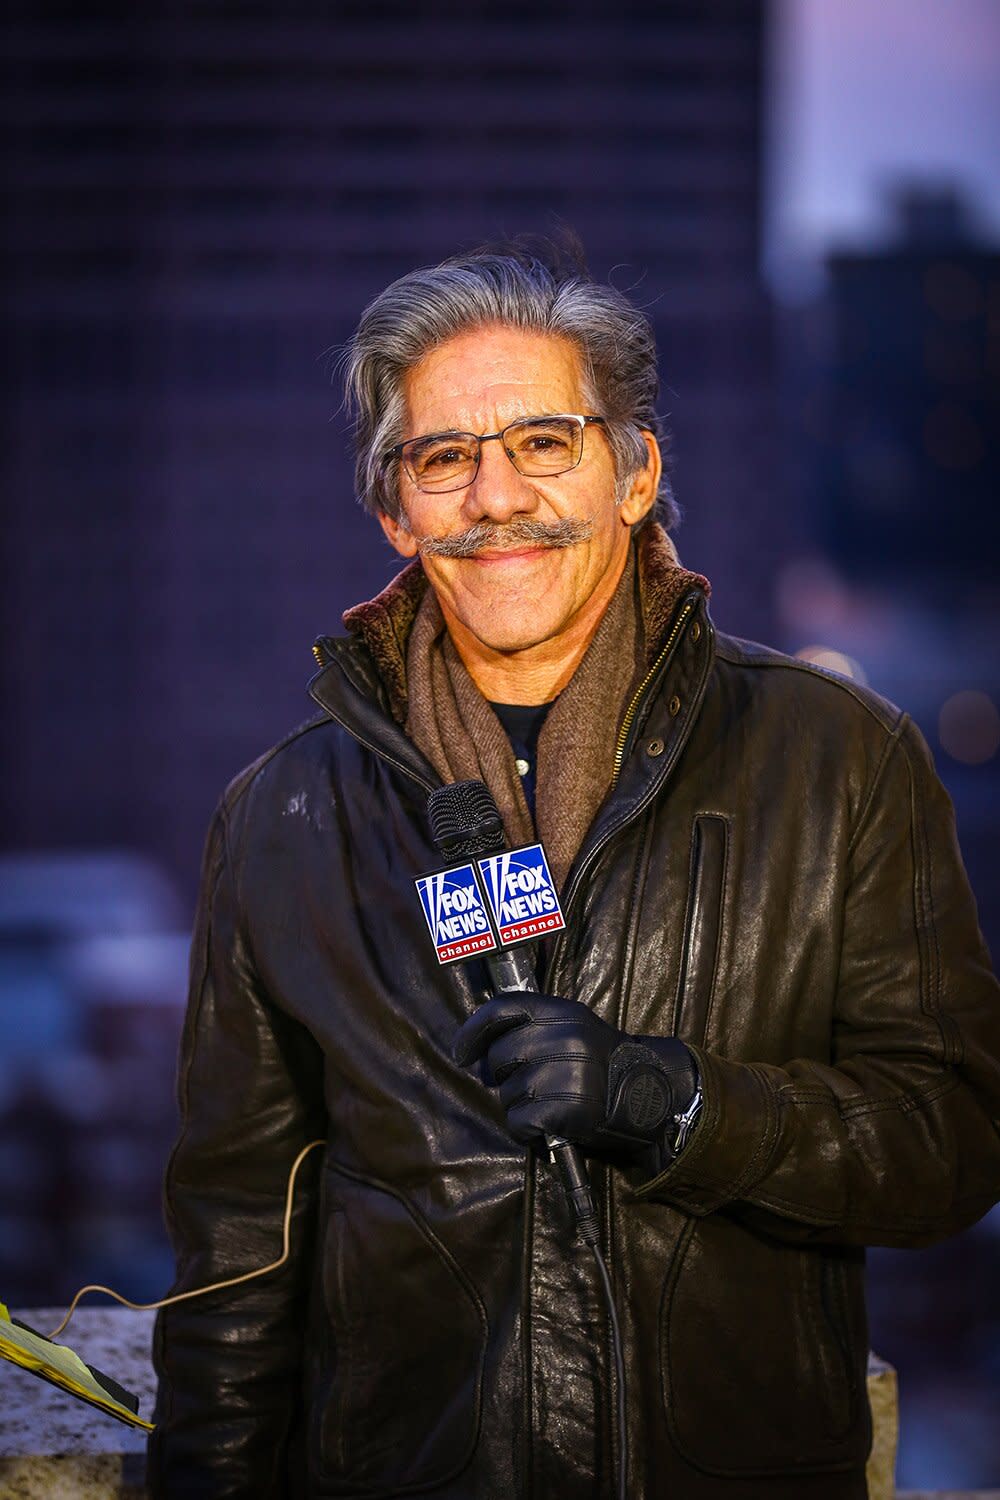 Geraldo Rivera on 50 Years in TV, His Friendship with President Donald